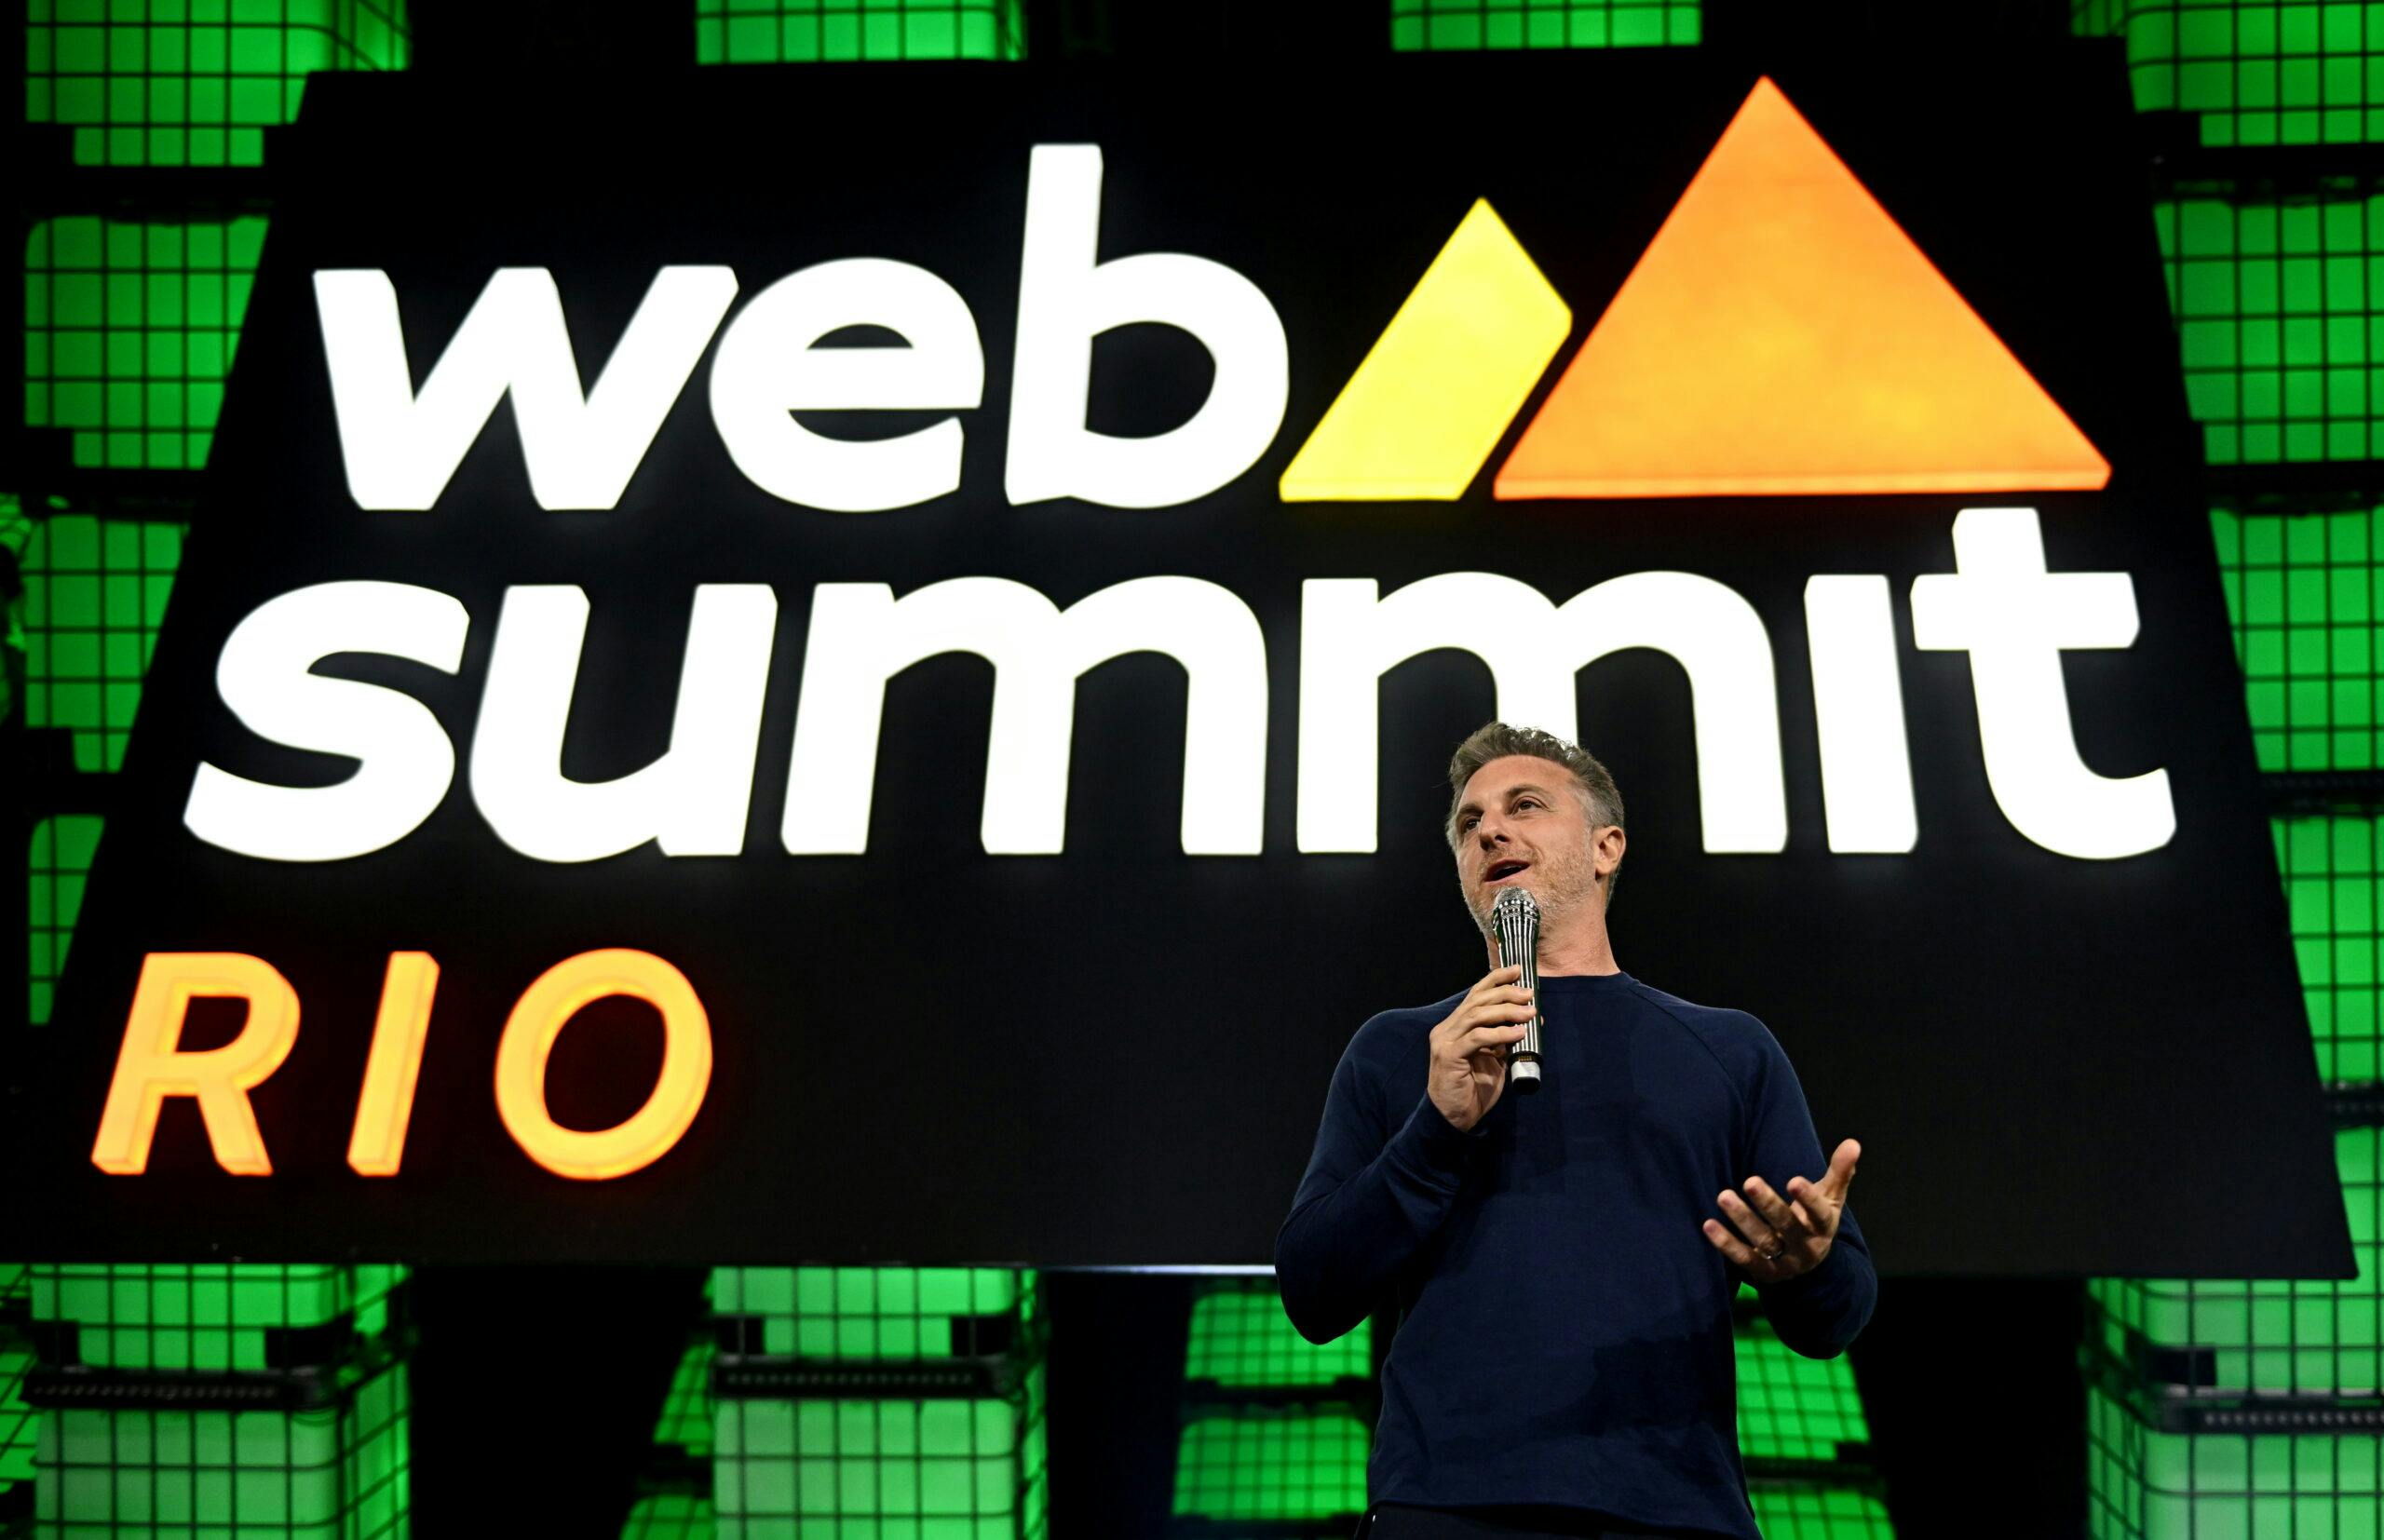 A person (TV star Luciano Huck) in front of a large sign that reads 'Web Summit Rio' and features the Web Summit Rio logo. The person is holding a microphone in their right hand and is gesturing with their left hand. They appear to be speaking.